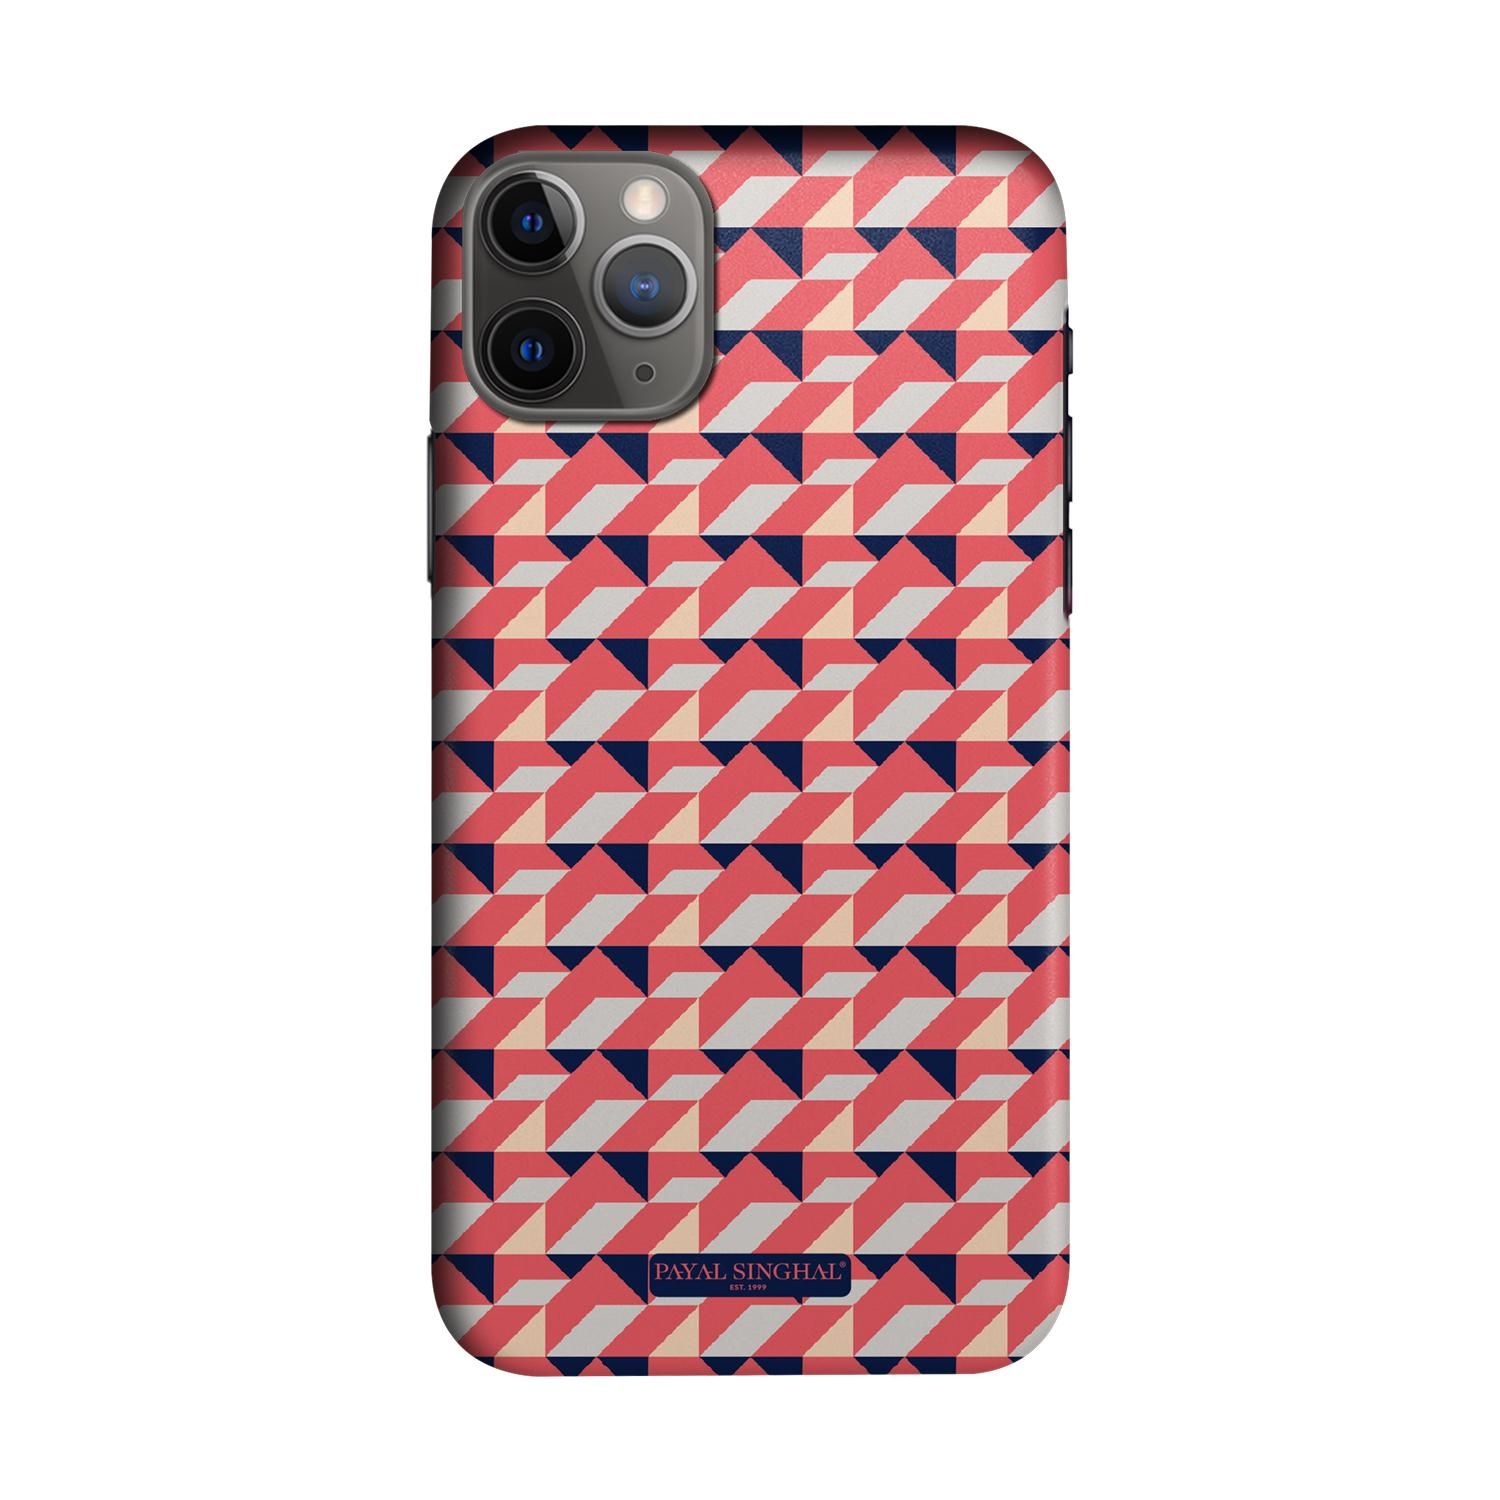 Buy Payal Singhal Coral Navy - Sleek Phone Case for iPhone 11 Pro Online